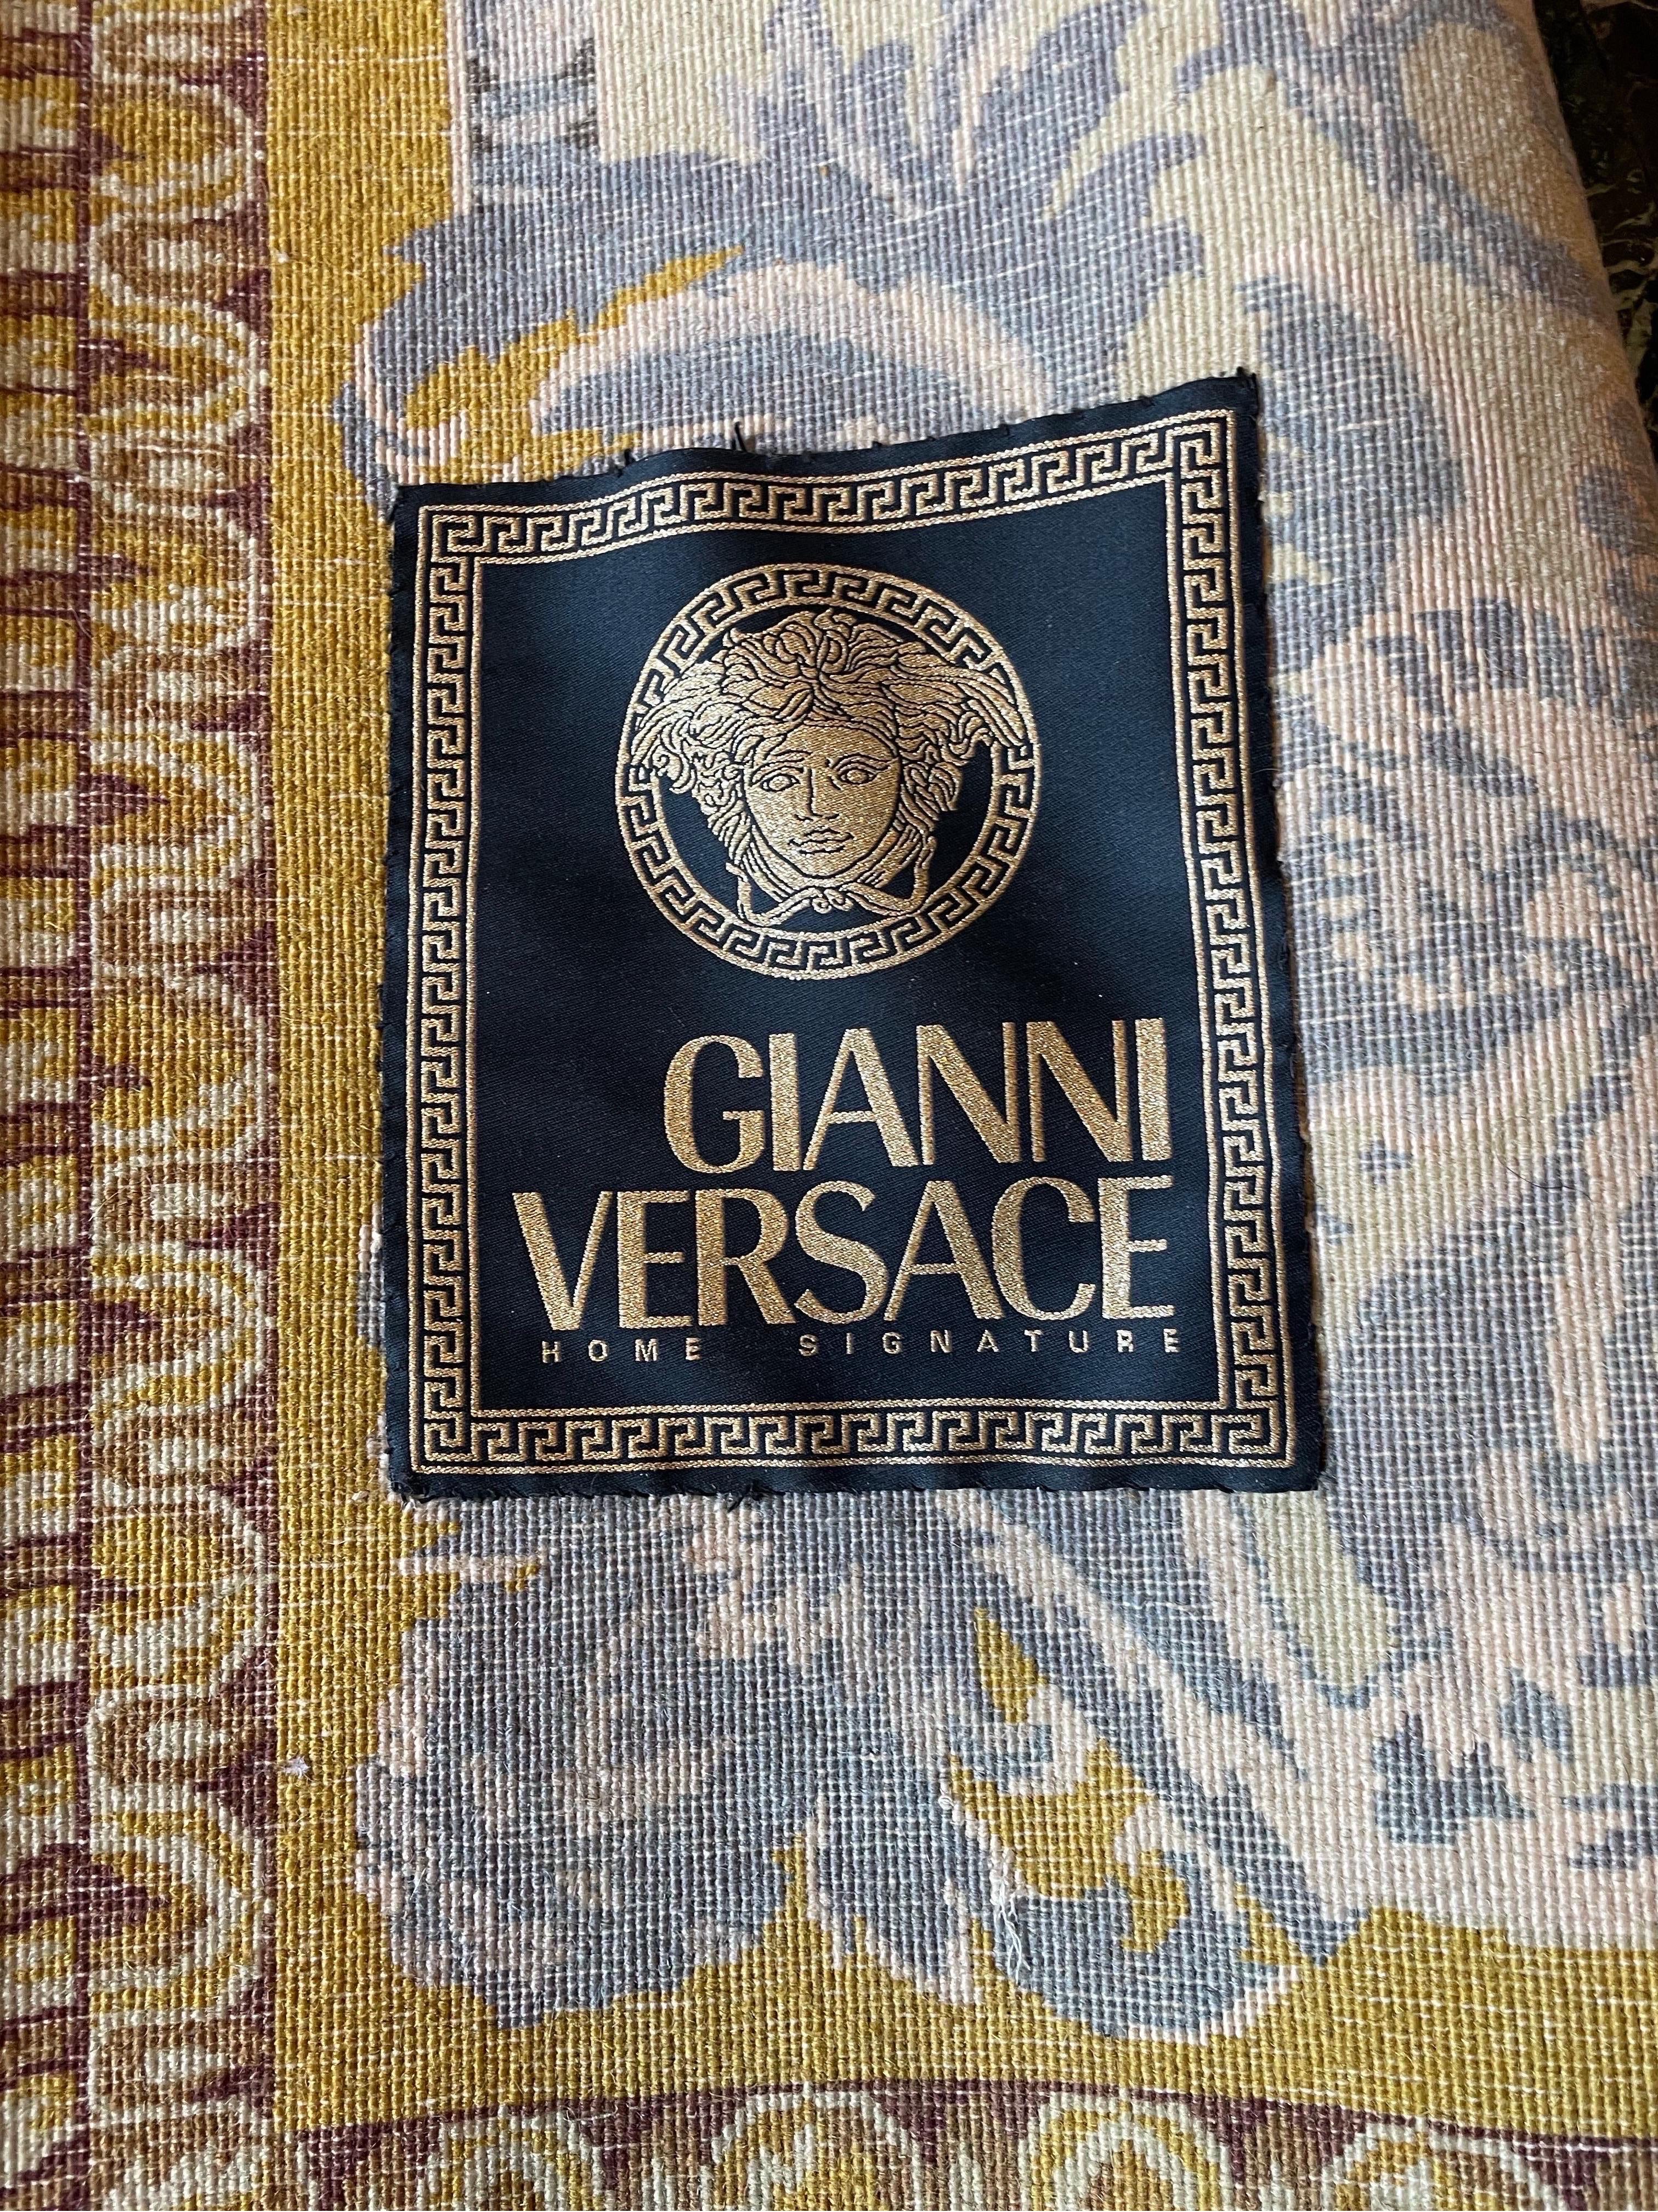 Gianni Versace Atelier Rug  In Excellent Condition For Sale In Long Island, NY